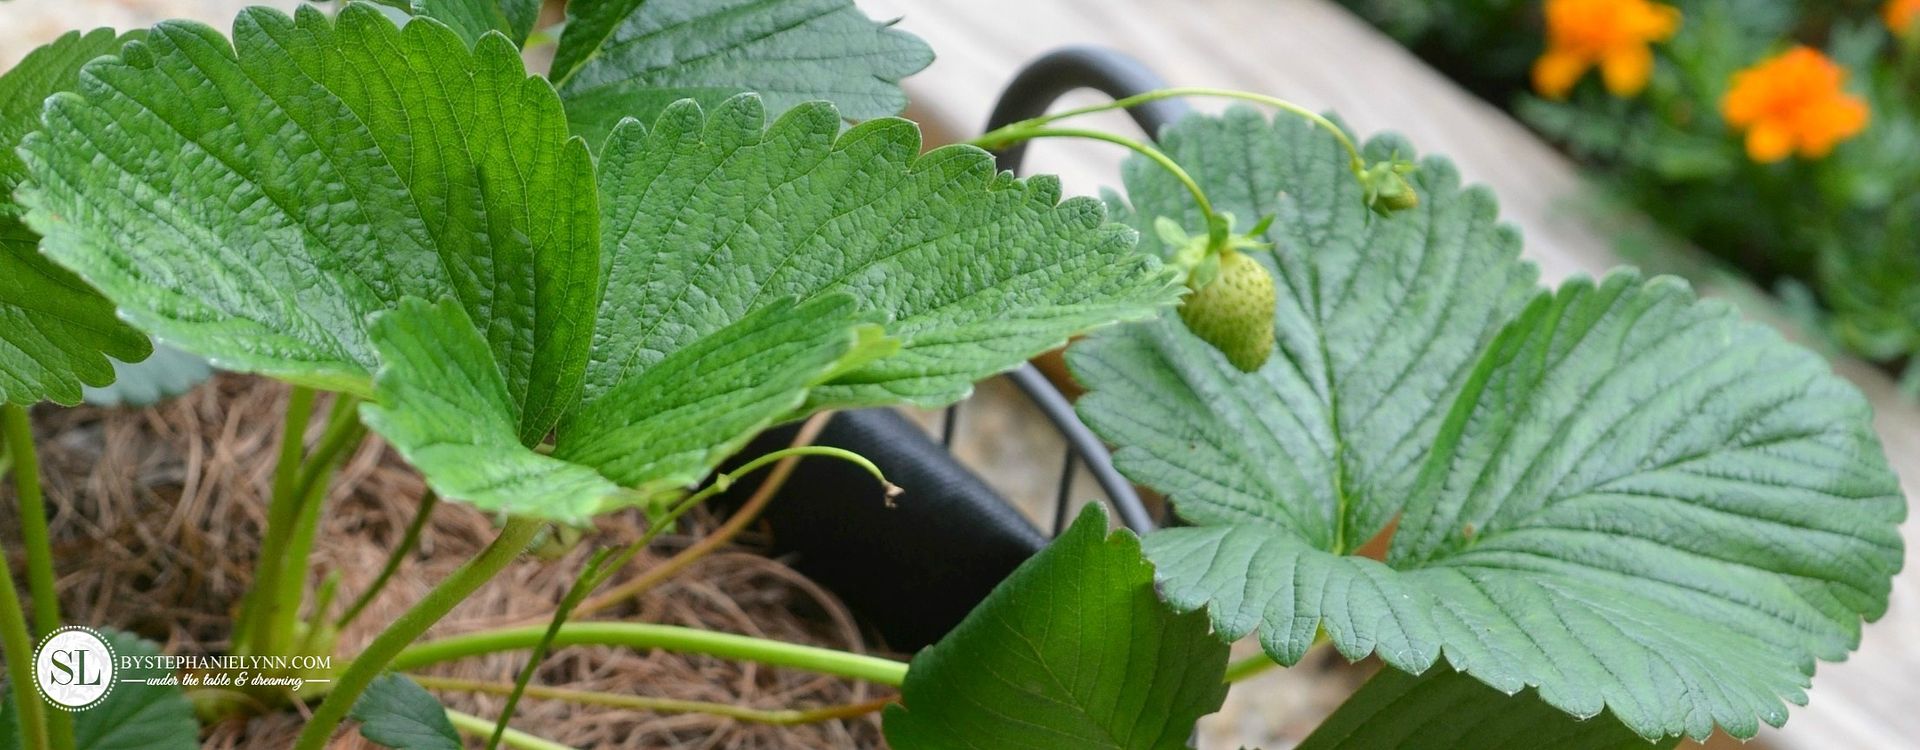 Strawberry Tower | how to grow strawberries in a basket #michaelsmakers 